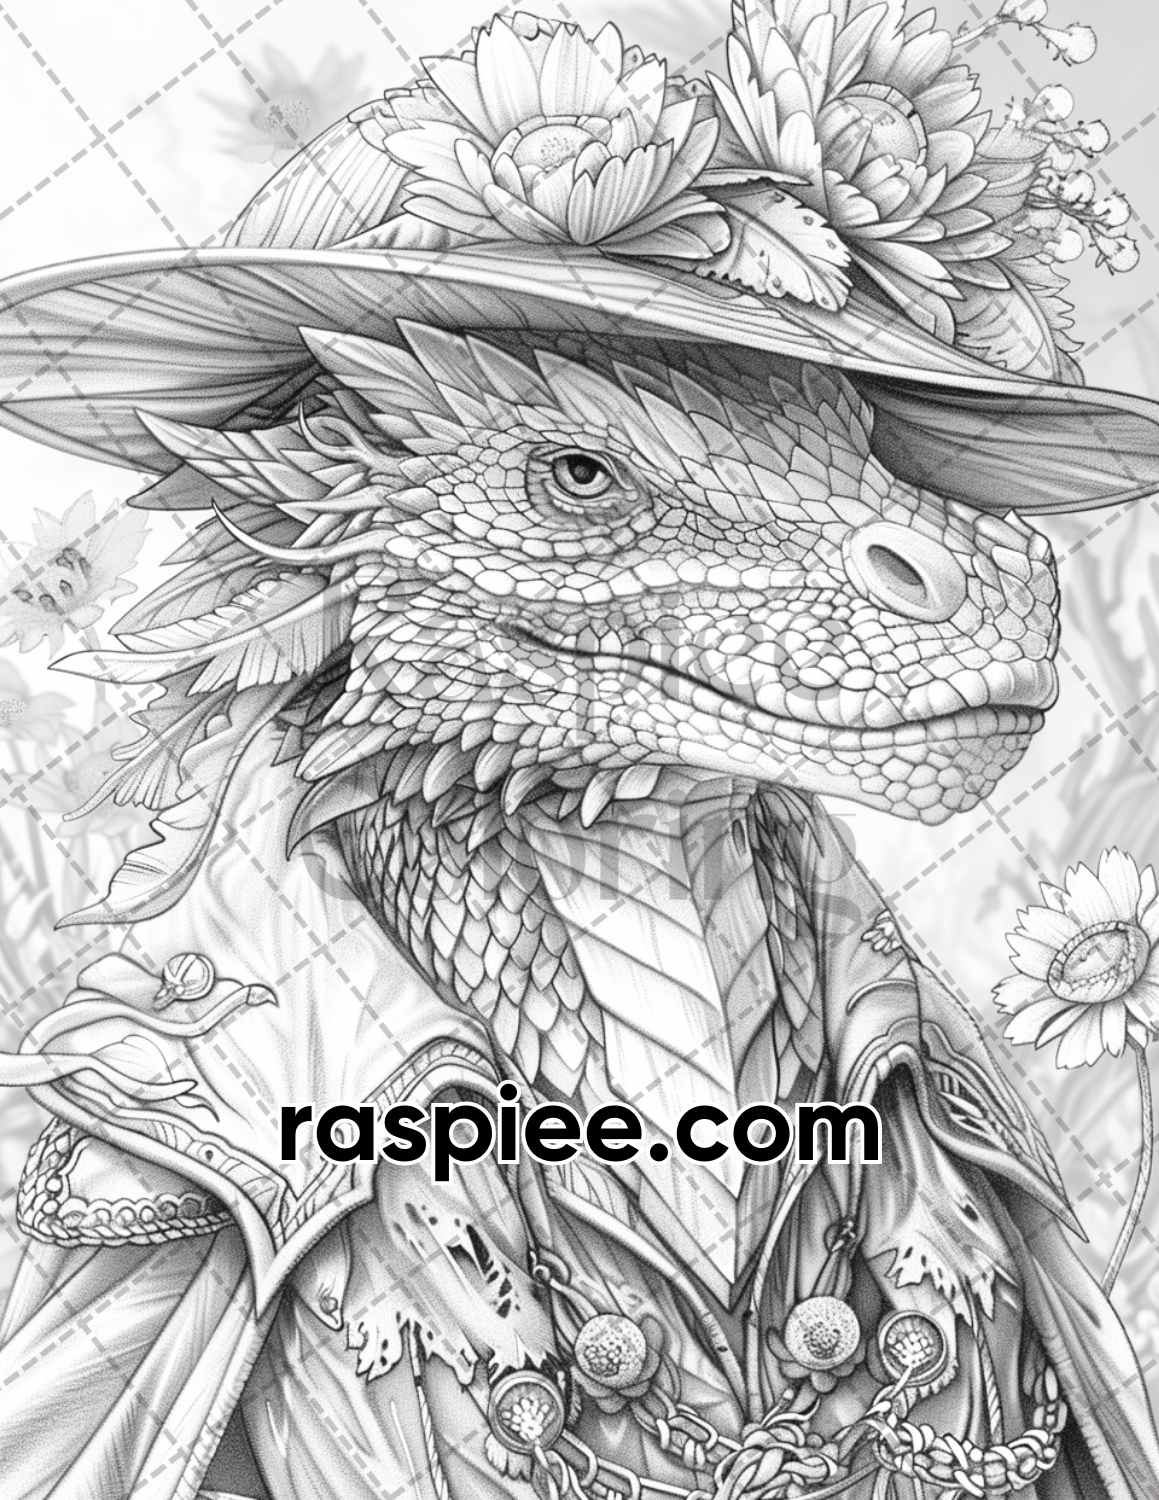 adult coloring pages, adult coloring sheets, adult coloring book pdf, adult coloring book printable, grayscale coloring pages, grayscale coloring books, grayscale illustration, wizard animals adult coloring pages, wizard animals adult coloring book